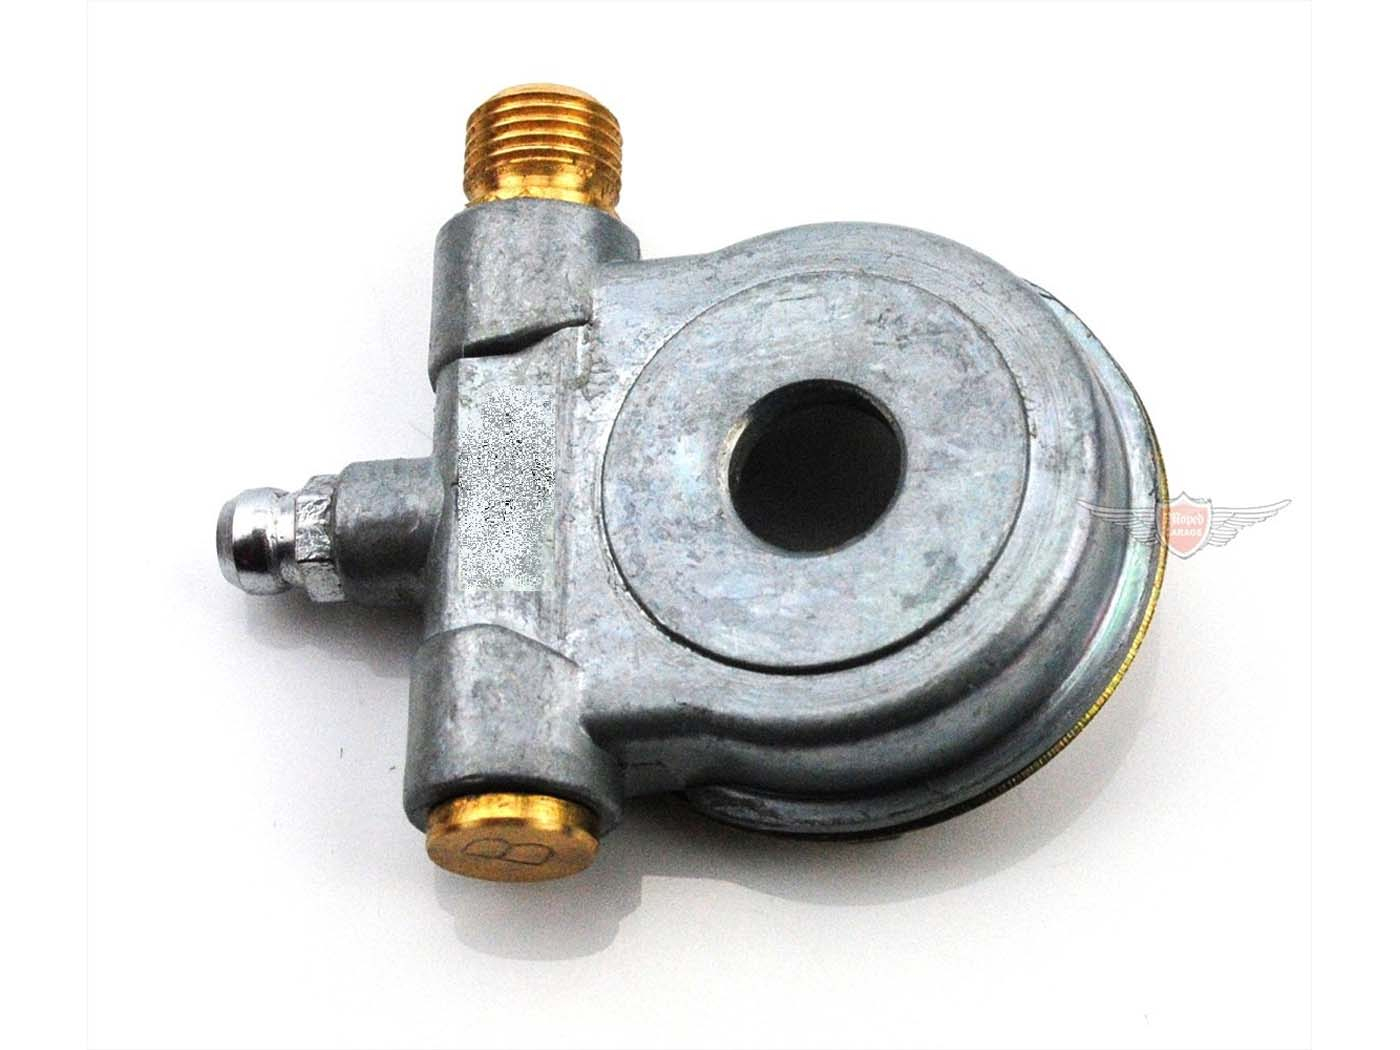 Speedometer Drive Moped 10mm Axle Bore 39mm Outer Diameter 22mm Inner Diameter 13mm Width 32mm Driver Spacing For Moped, Moped, Mokick